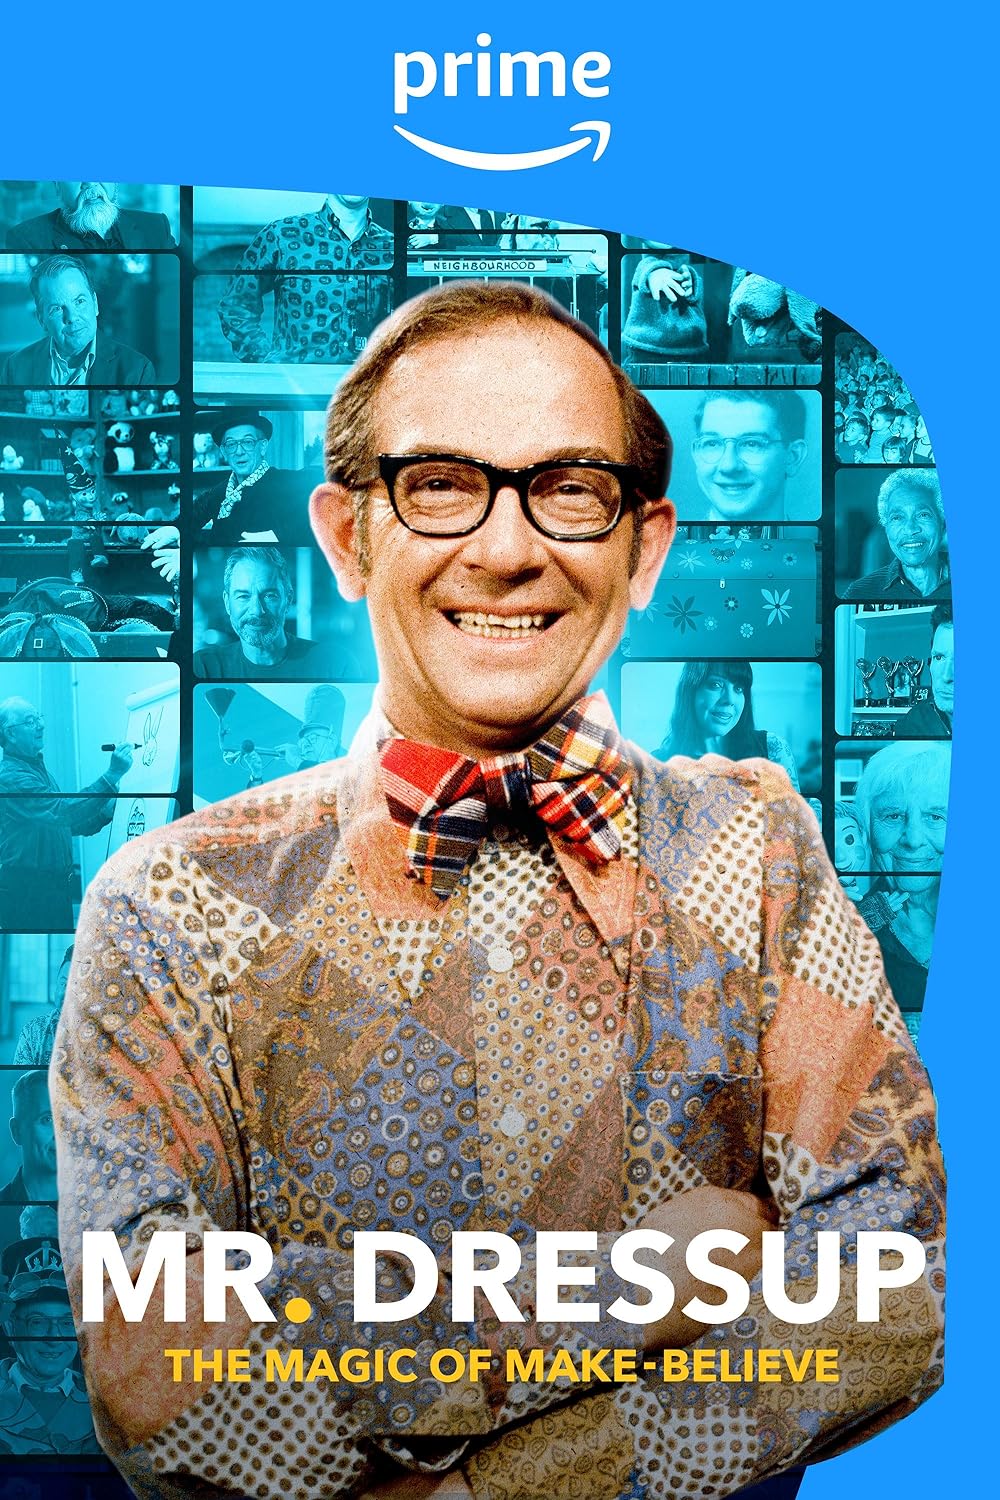 Mr. Dressup: The Magic of Make-Believe (October 14) - Prime Video
It is based on the life and career of renowned Canadian children's entertainer Ernie Coombs, or Mr. Dressup as he is more popularly known by millions of admirers.